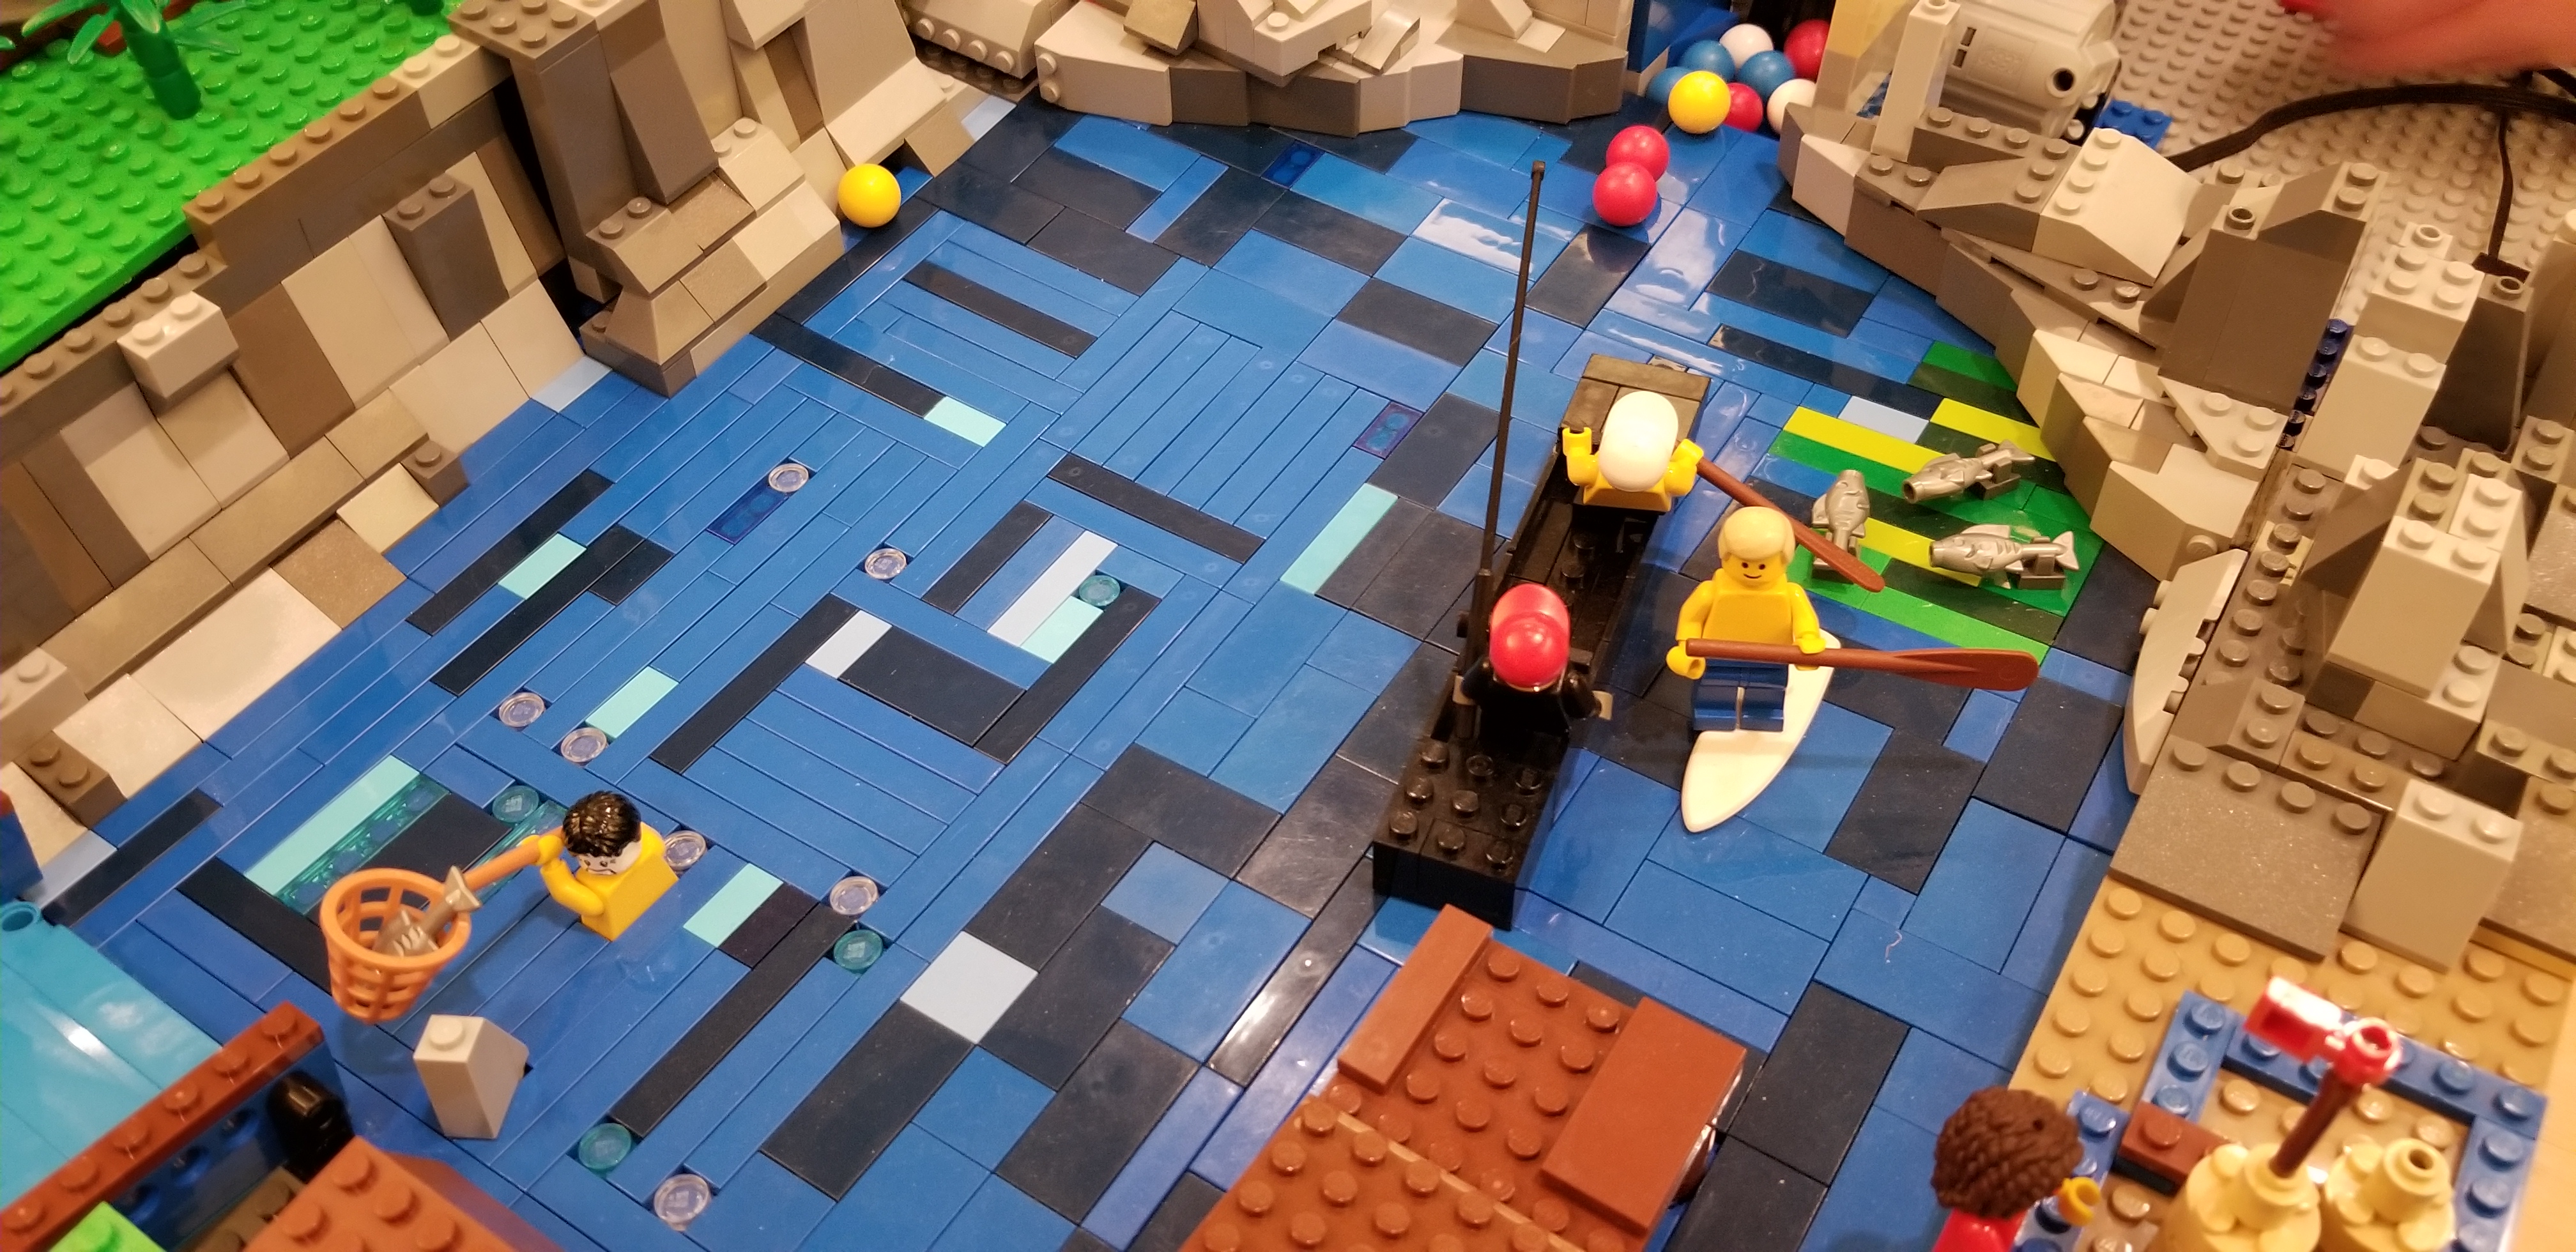 Silas' Lego creation includes a lake of blue legos with endangered fish and people boating.